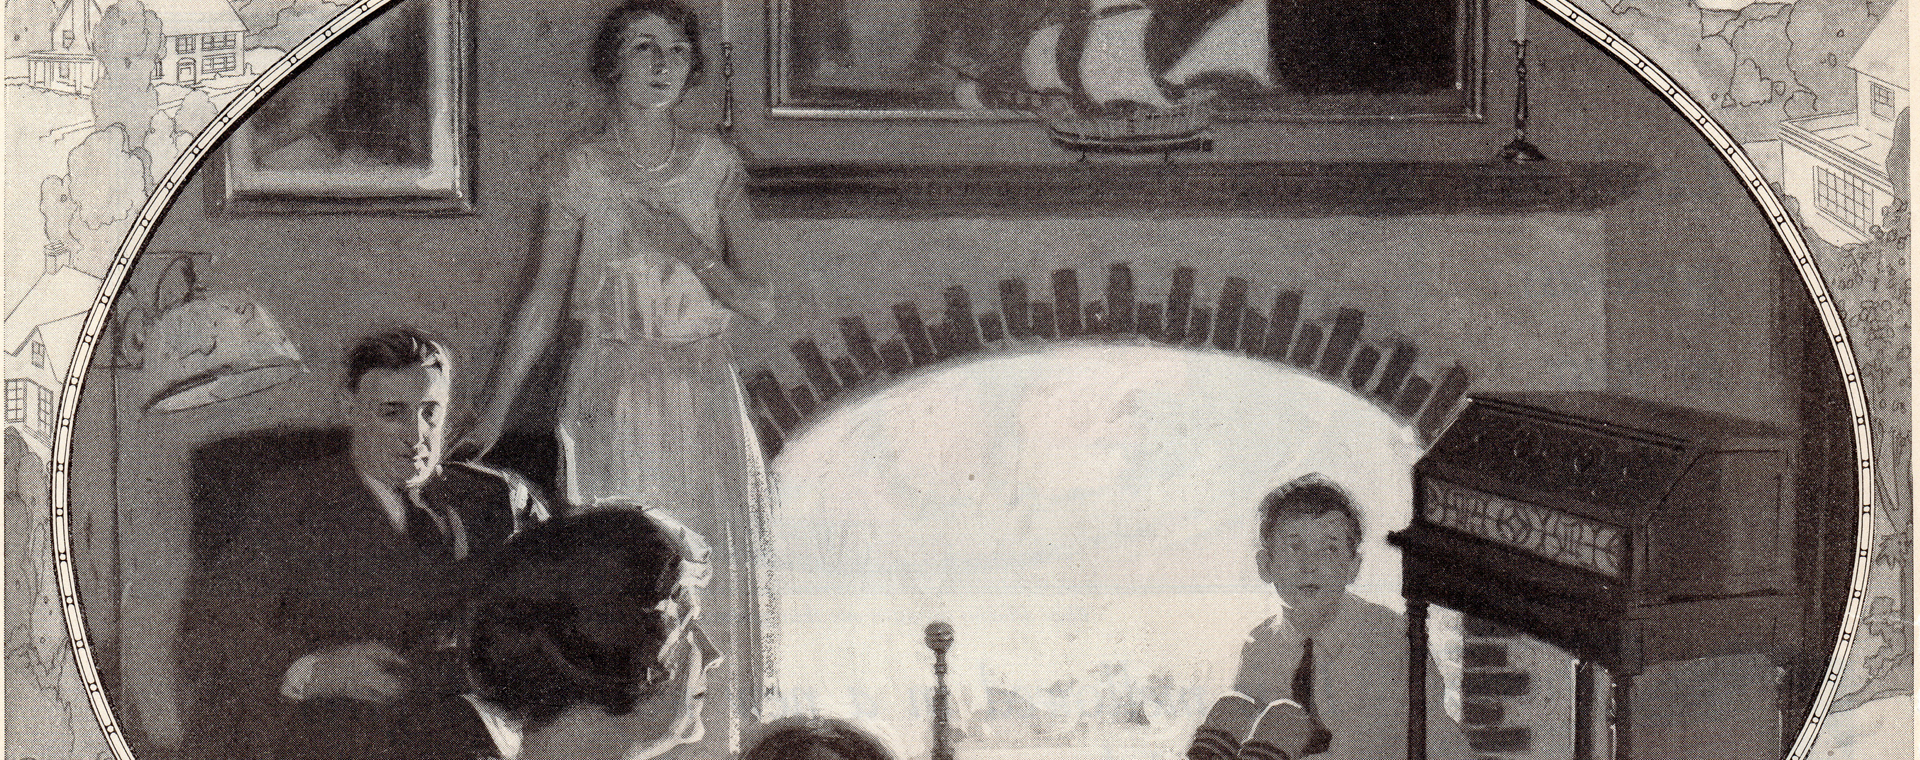 A black and white illustration of a family featuring a mother, father, two daughters and one son seated indoors in front of a burning fireplace and a radio. The illustration is oval-shaped and bordered by another illustration of a rural landscape.